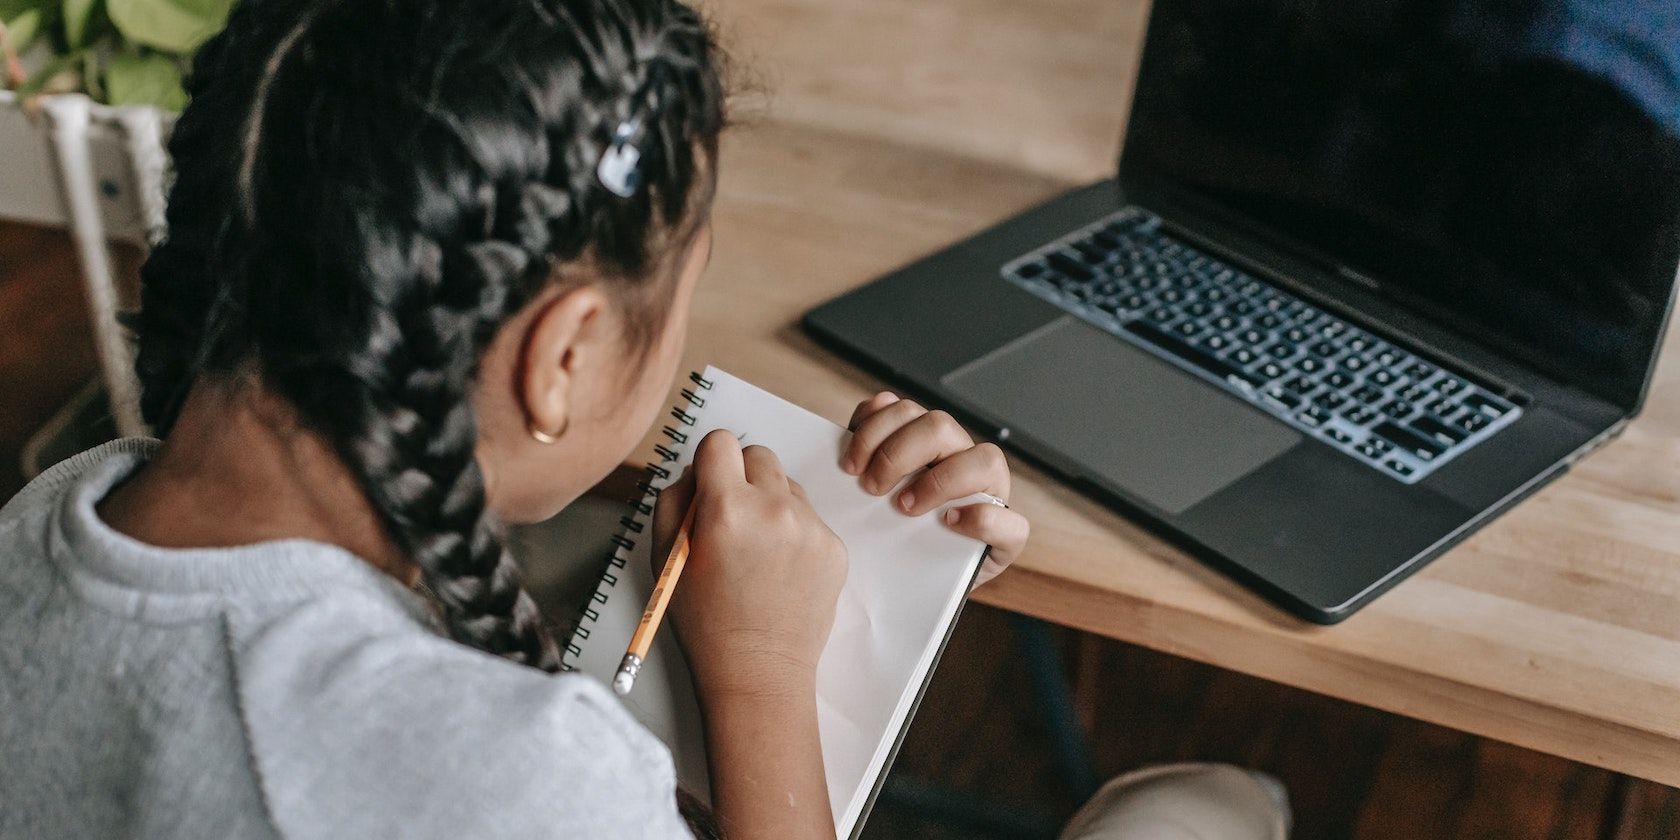 Woman With Braids Writing on Notebook While Using Laptop